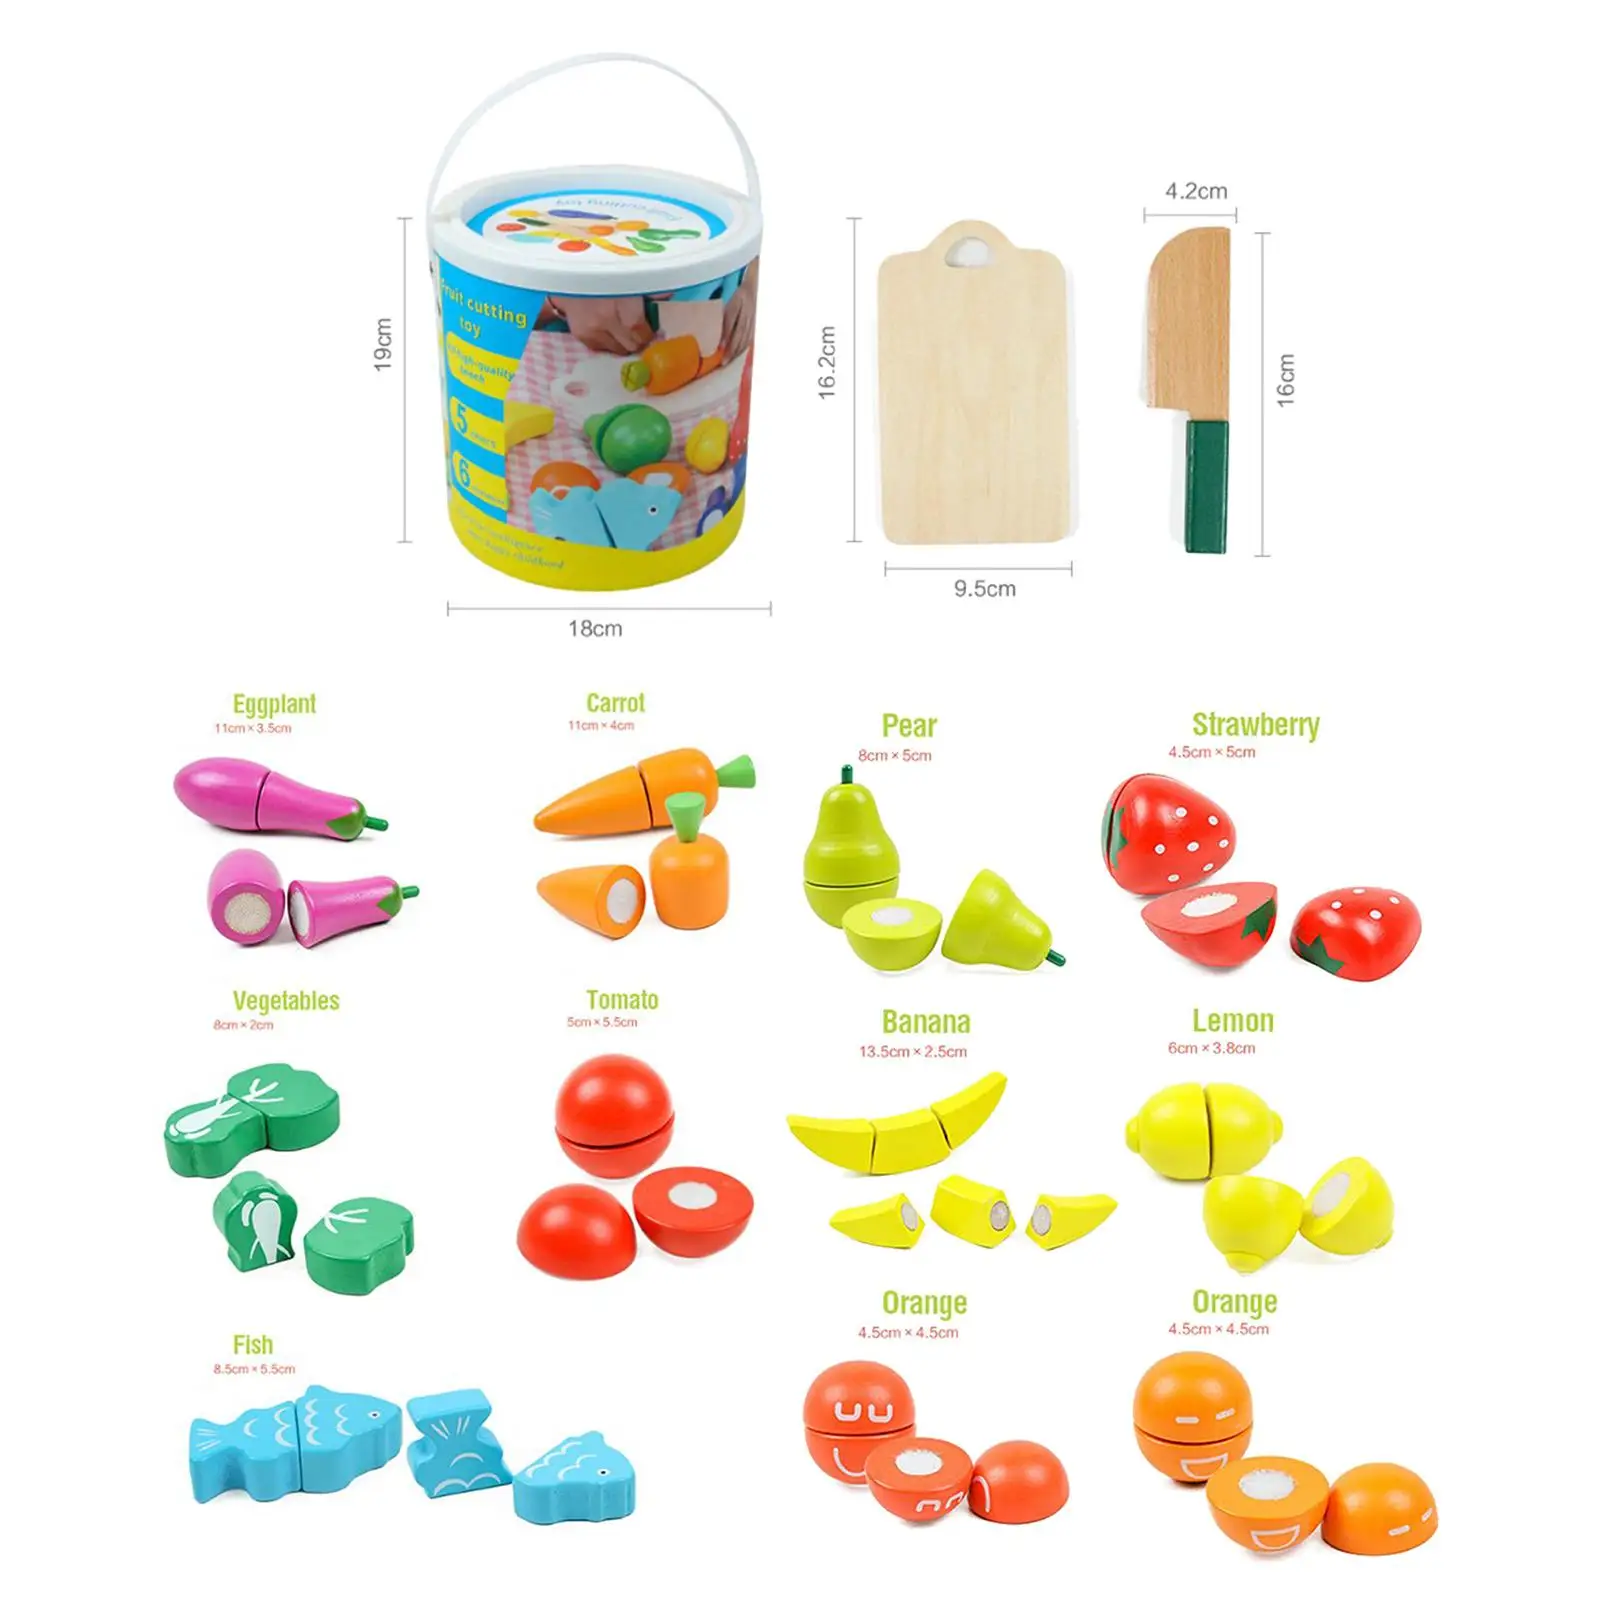 Play Food Toy Pretend Kitchen Toys for Ages 1-3 Years Old Children Gift